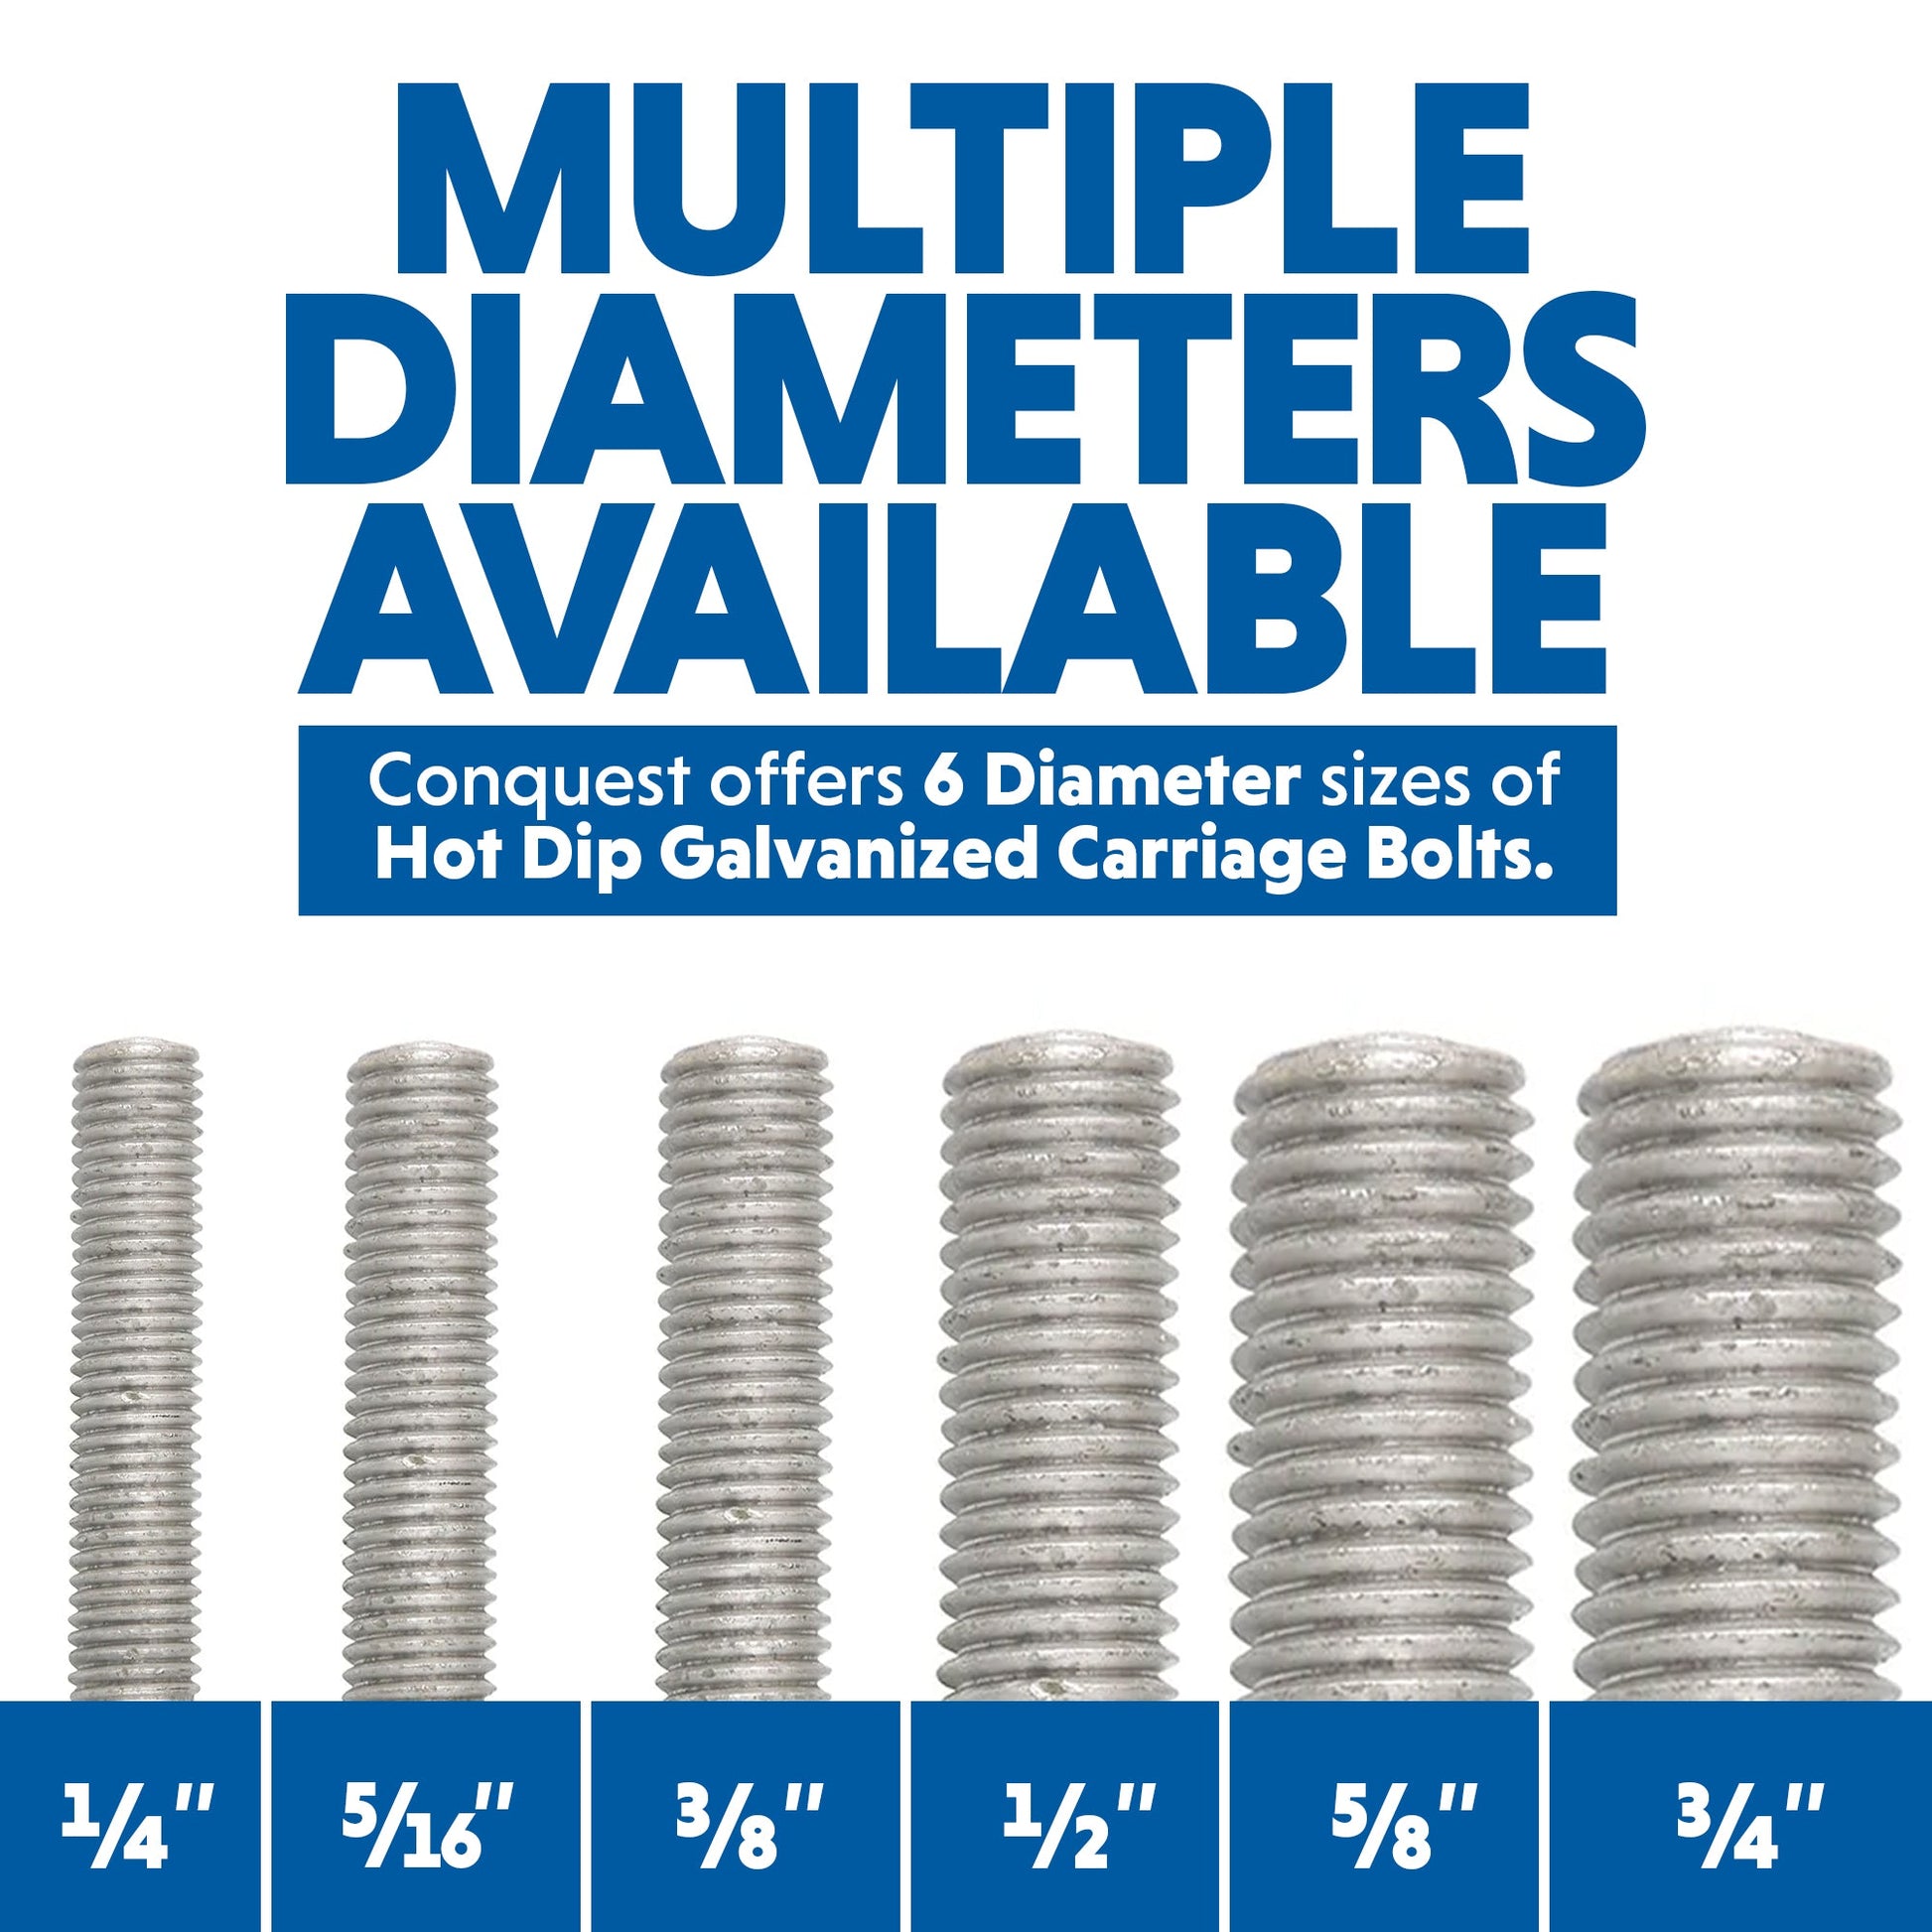 Conquest Hod Dipped Galvanized Carriage Bolts and Nuts are Available in 6 Diameters: 1/4", 5/16", 3/8", 1/2", 5/8" and 3/4"